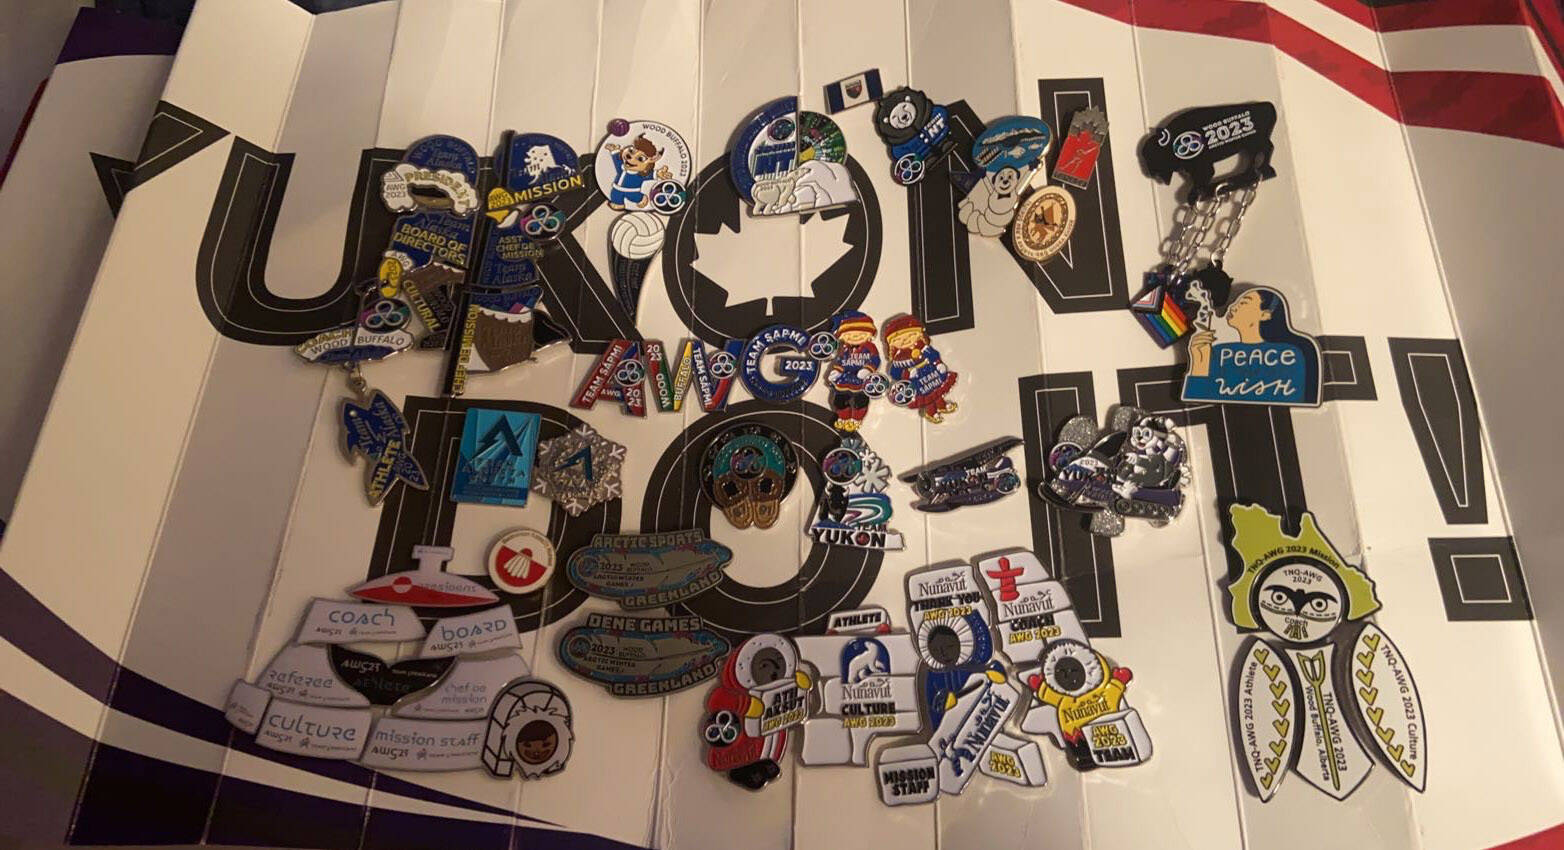 Emma Beck's completed pin collection is gathered. (Photo provided by Emma Beck)